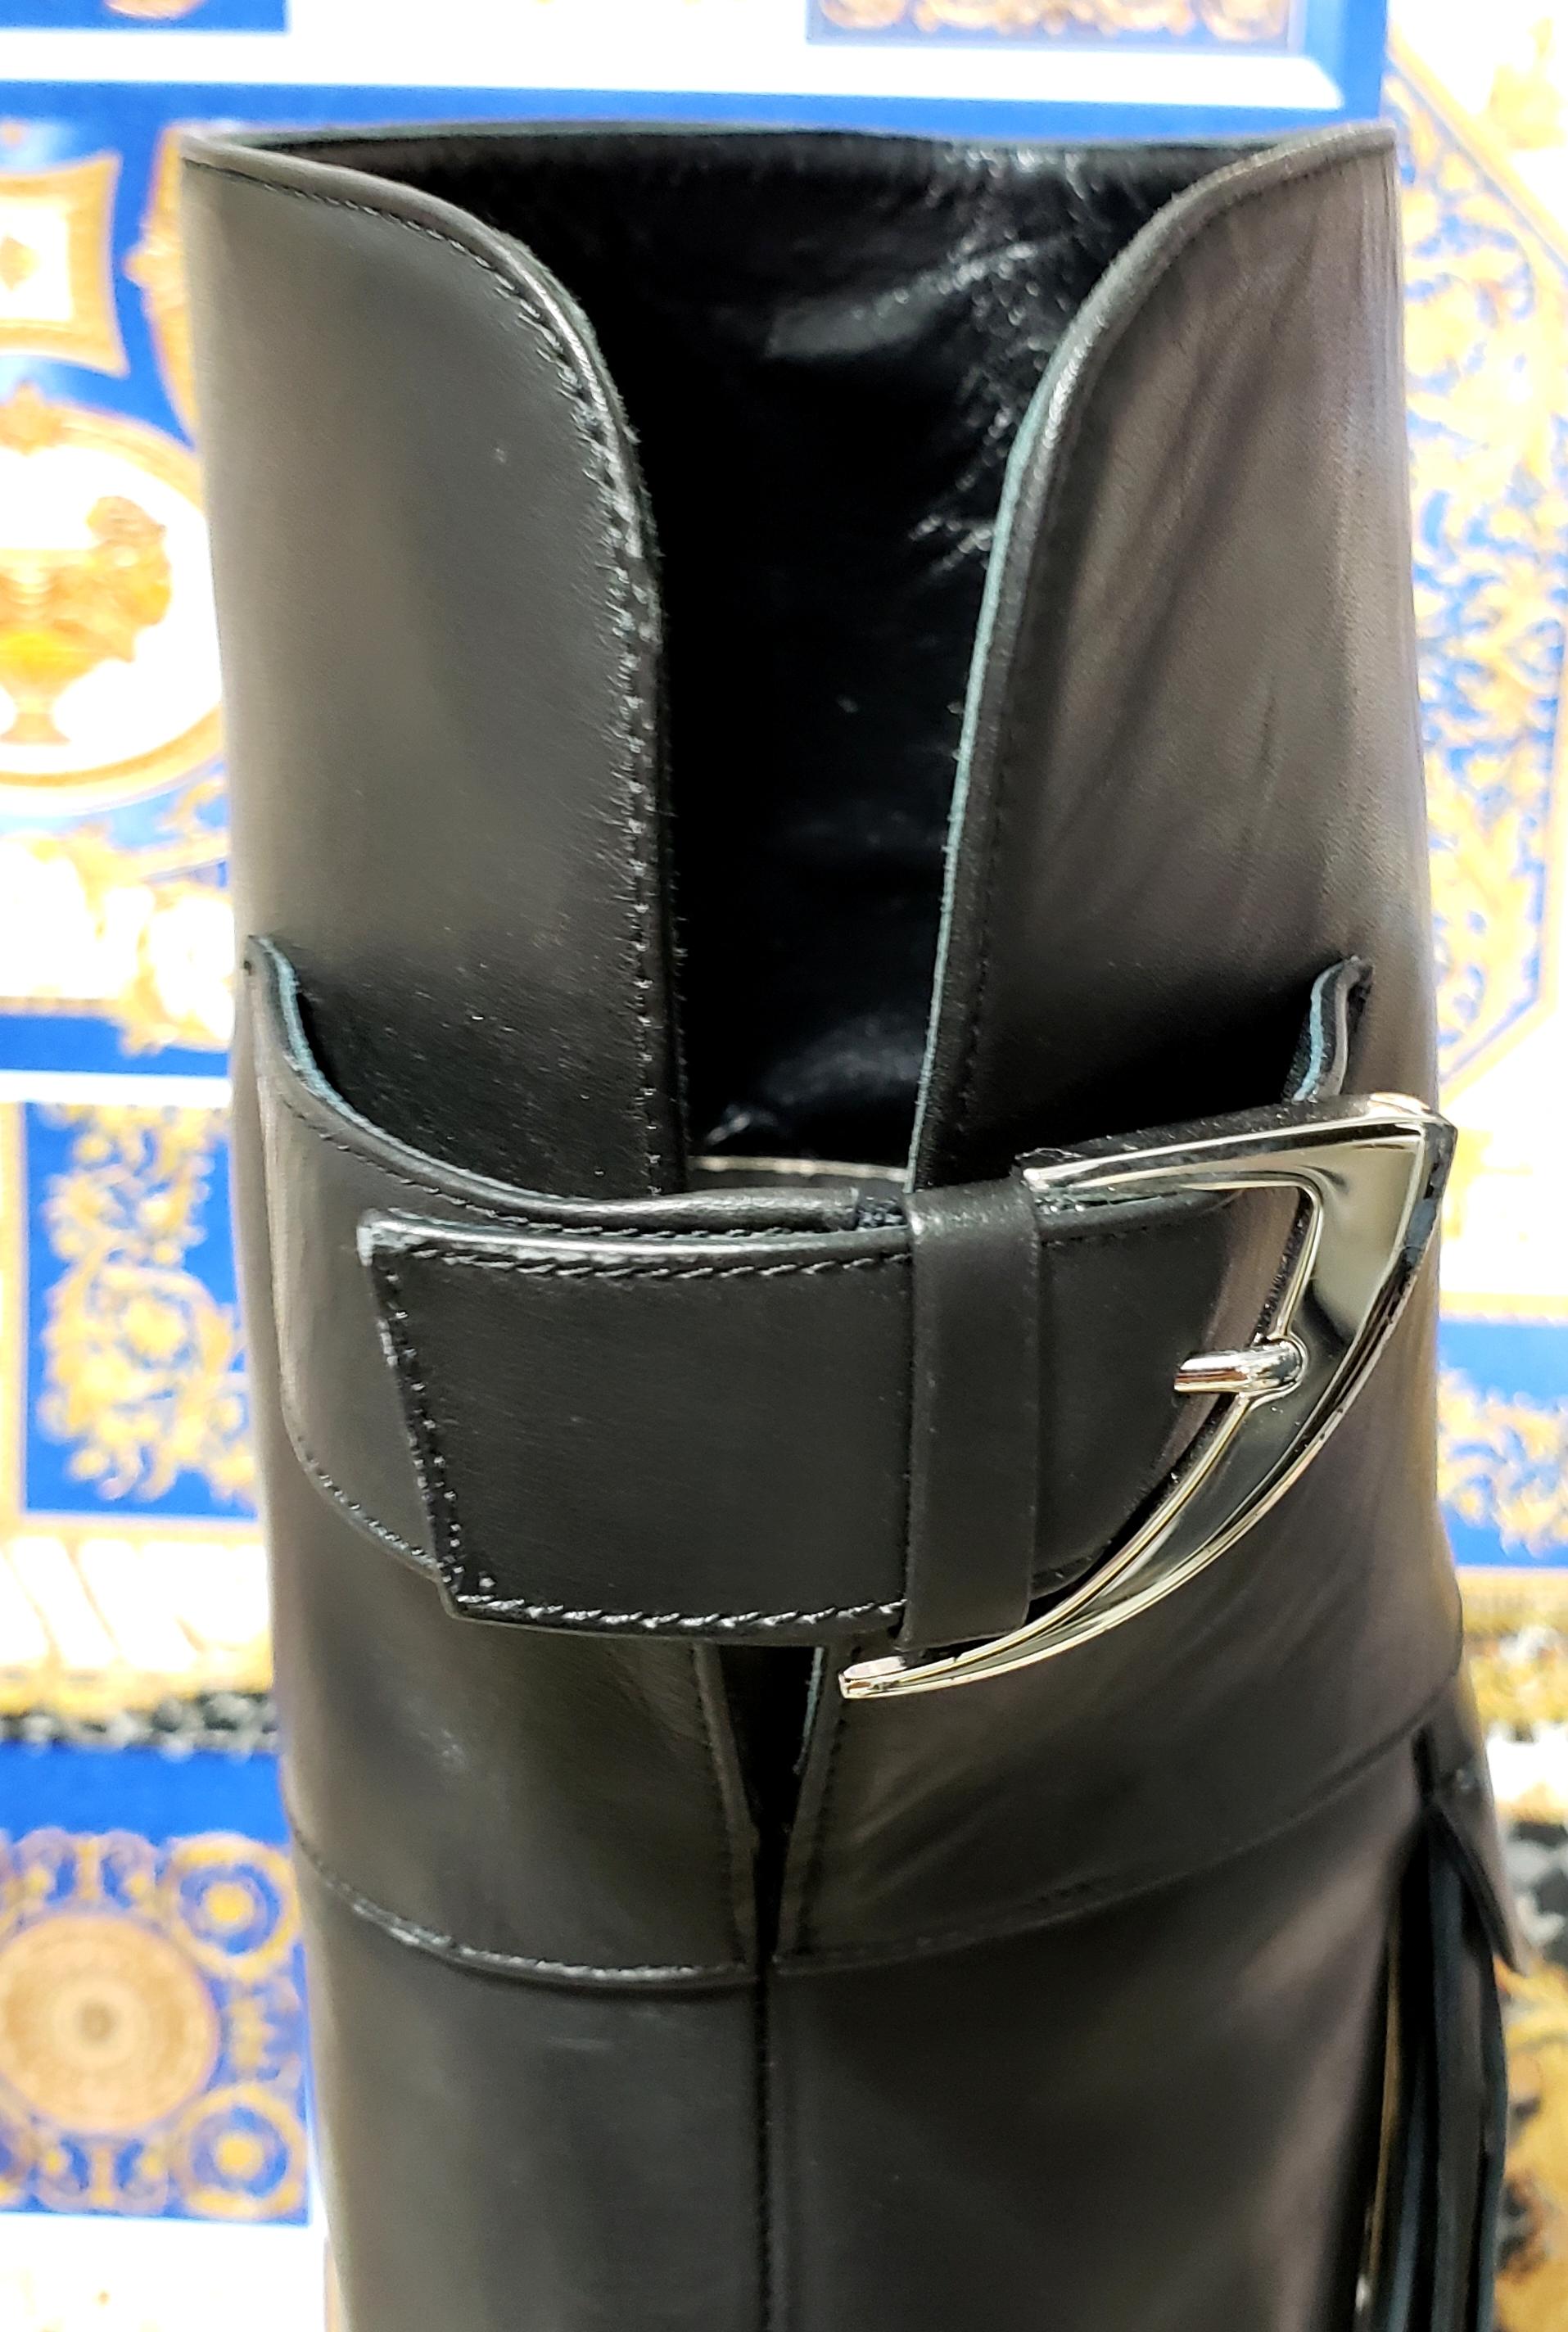 Pre-Fall/14 L#9 VERSACE BLACK LEATHER OVET-the-KNEE Boots with TASSELS 36 For Sale 6